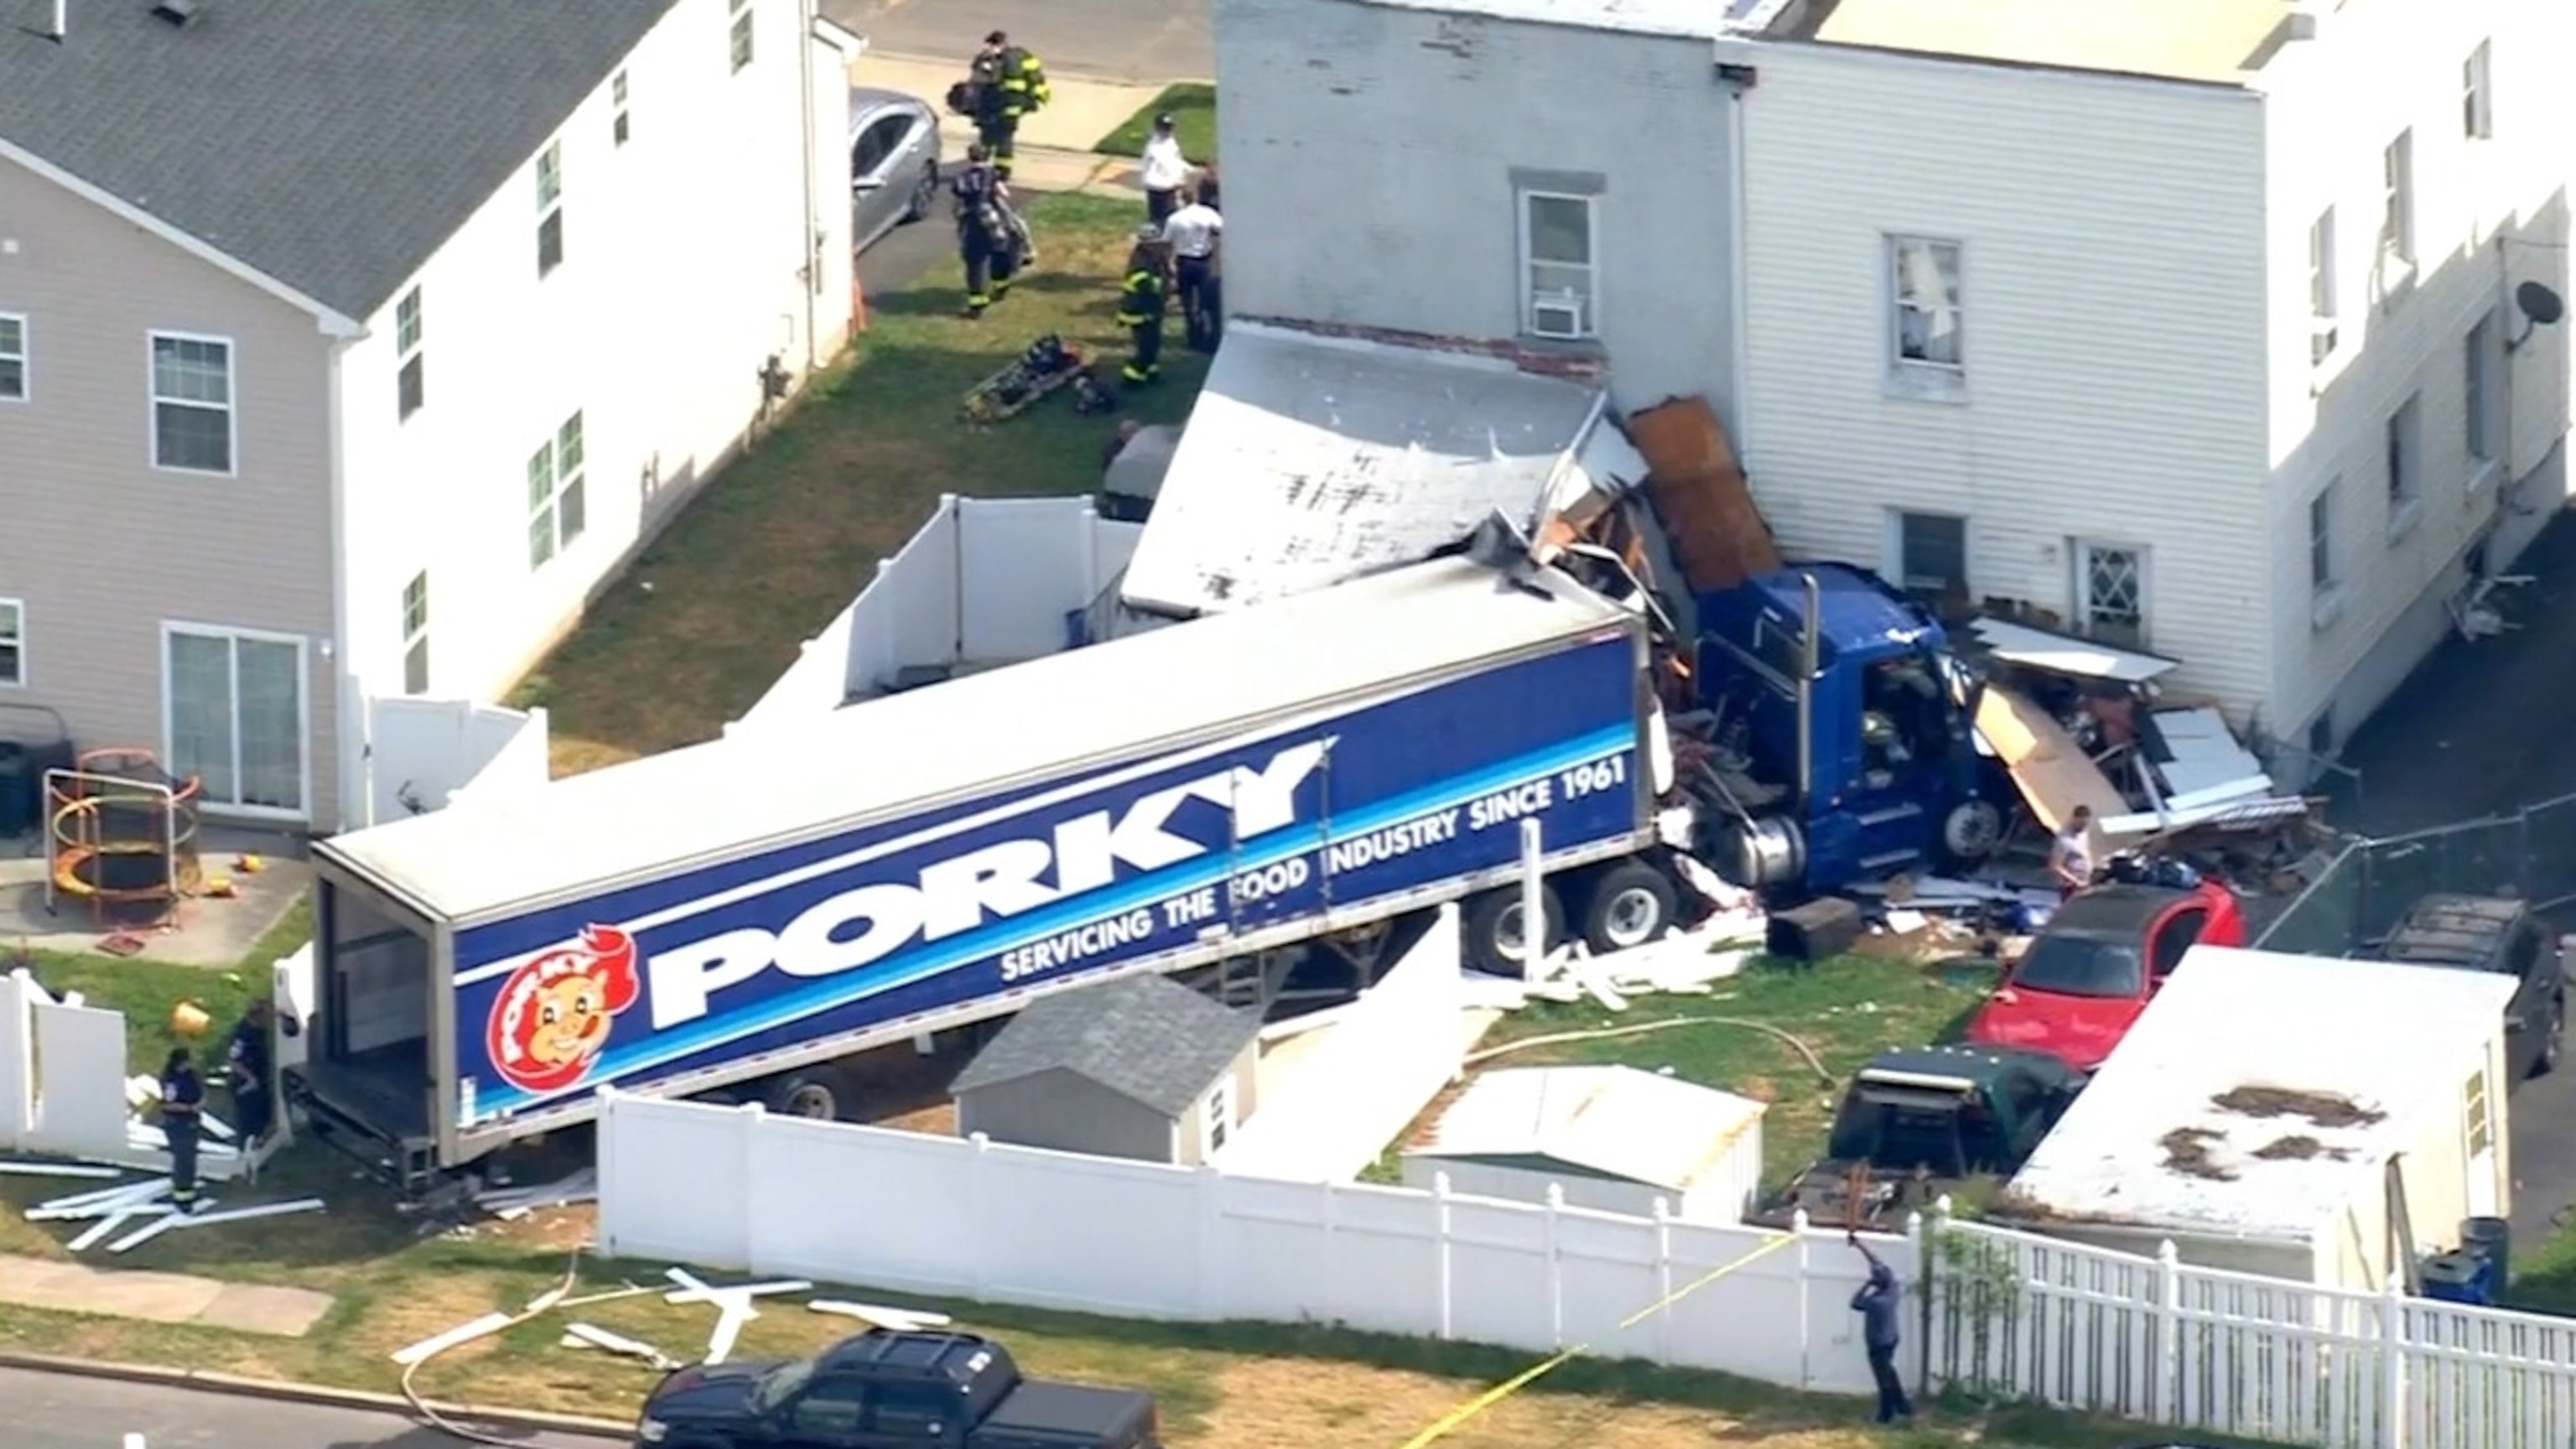 PHOTO: An accident occurred when a tractor trailer crashed into a house on Chrome Avenue near Industrial Highway/Middlesex Ave in NJ. The driver reportedly experienced a medical issue before the collision.